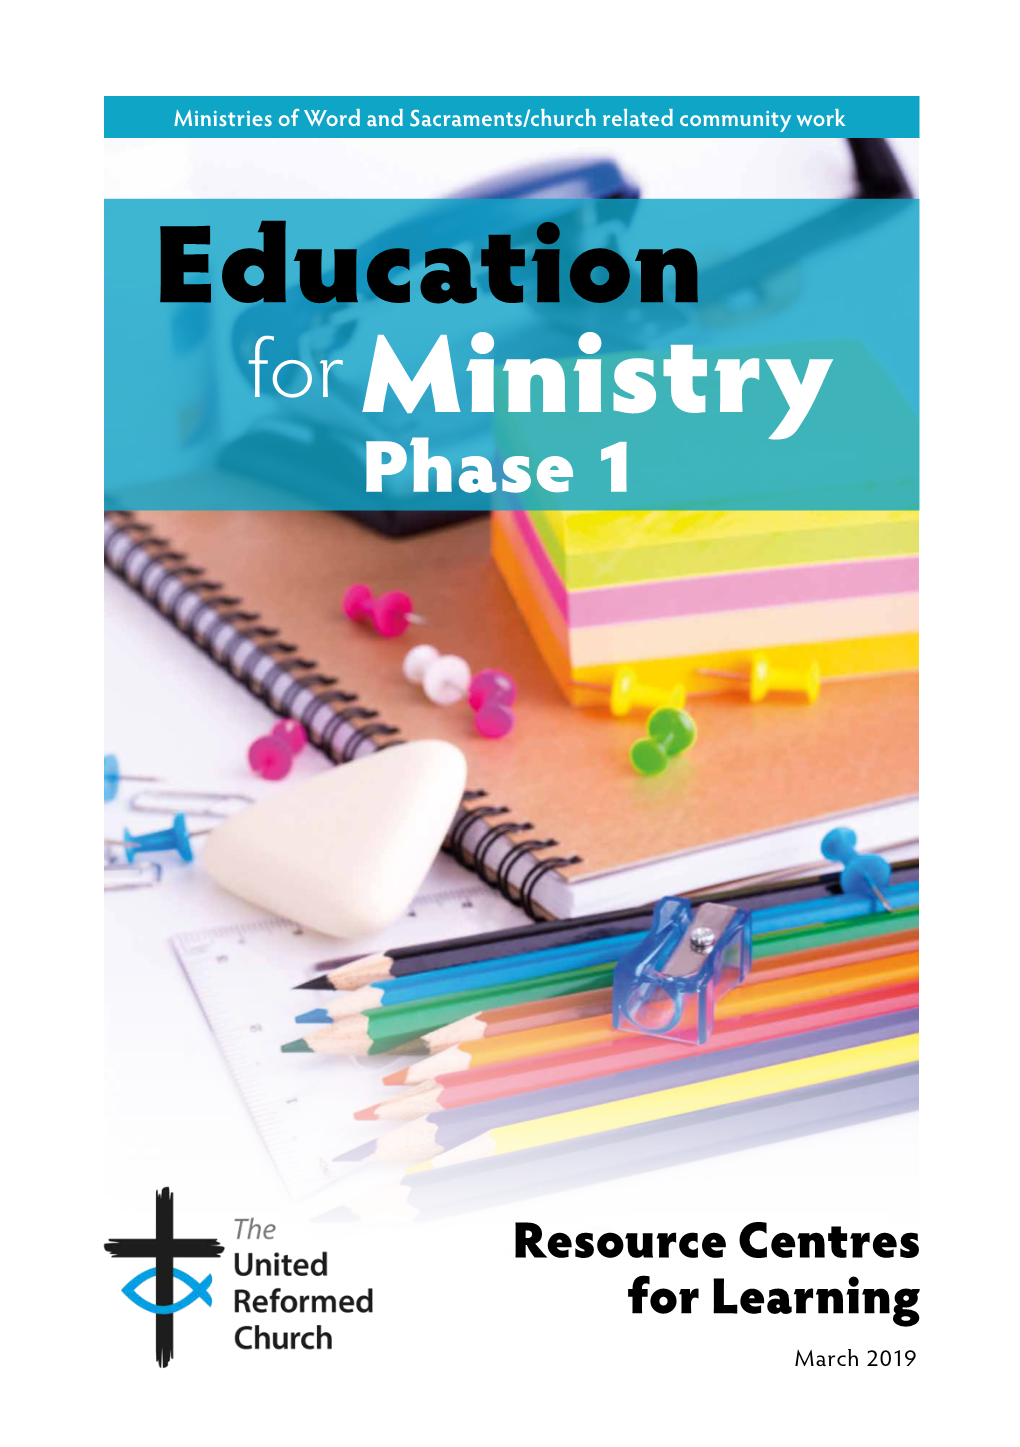 Education for Ministry Phase 1